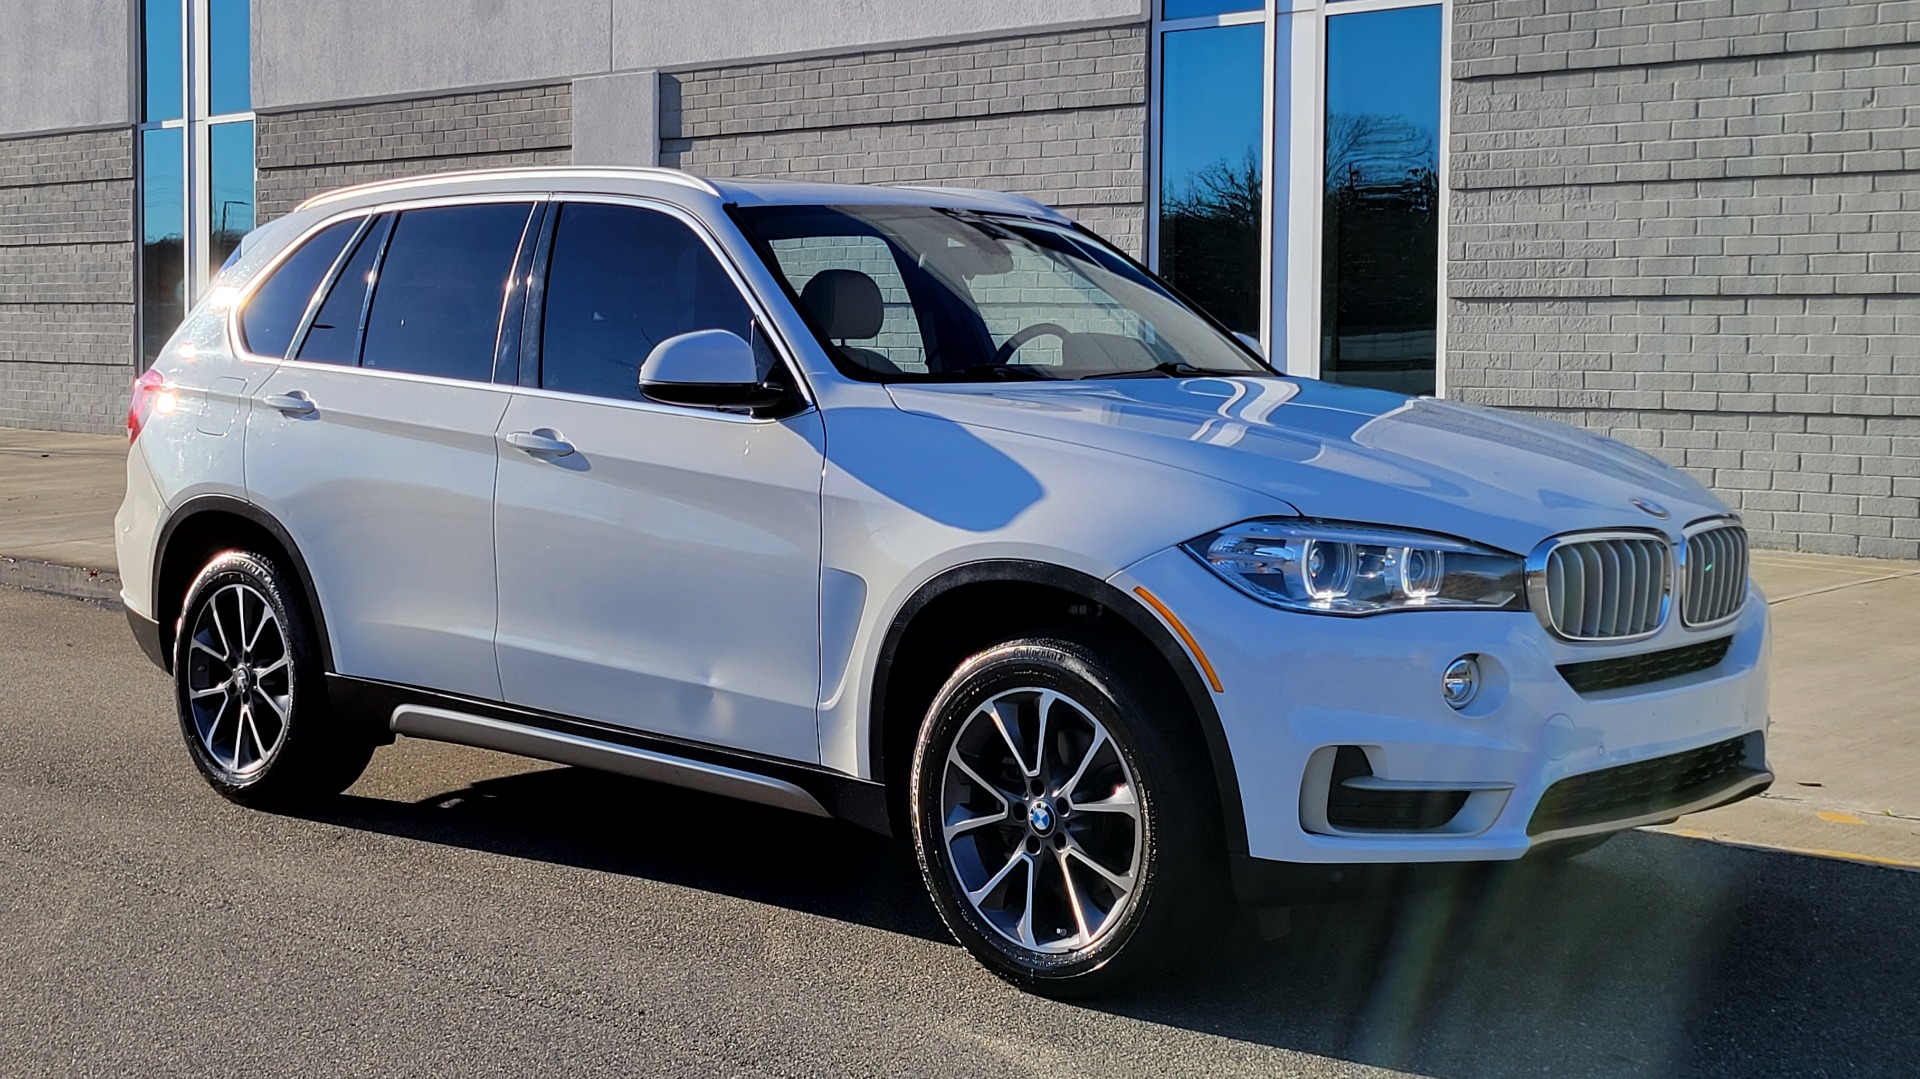 Used 2018 BMW X5 XDRIVE35I PREMIUM / DRVR ASST / HUD / WIRELESS CHARGING / HEATED SEATS for sale $42,995 at Formula Imports in Charlotte NC 28227 6